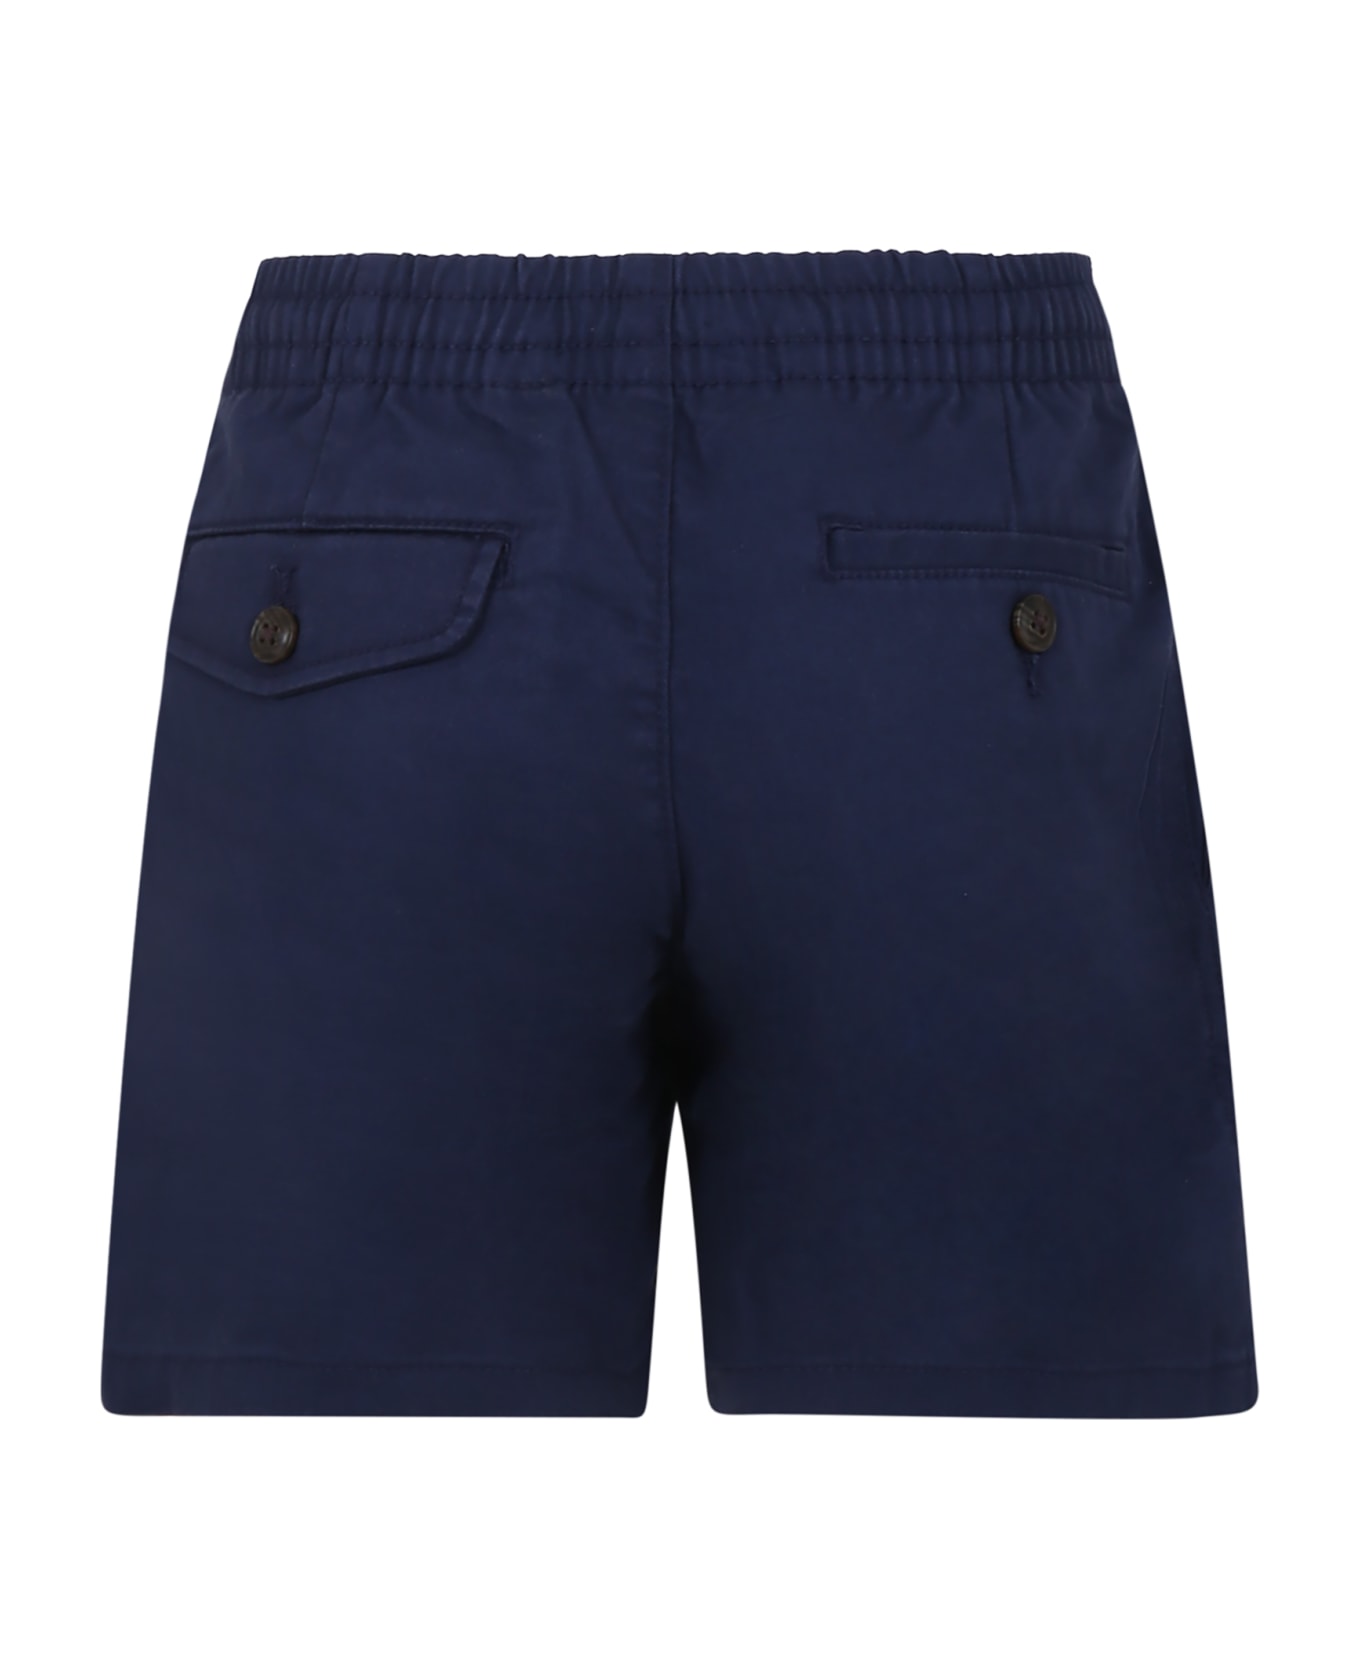 Ralph Lauren Blue Shorts For Boy With Pony - Blue